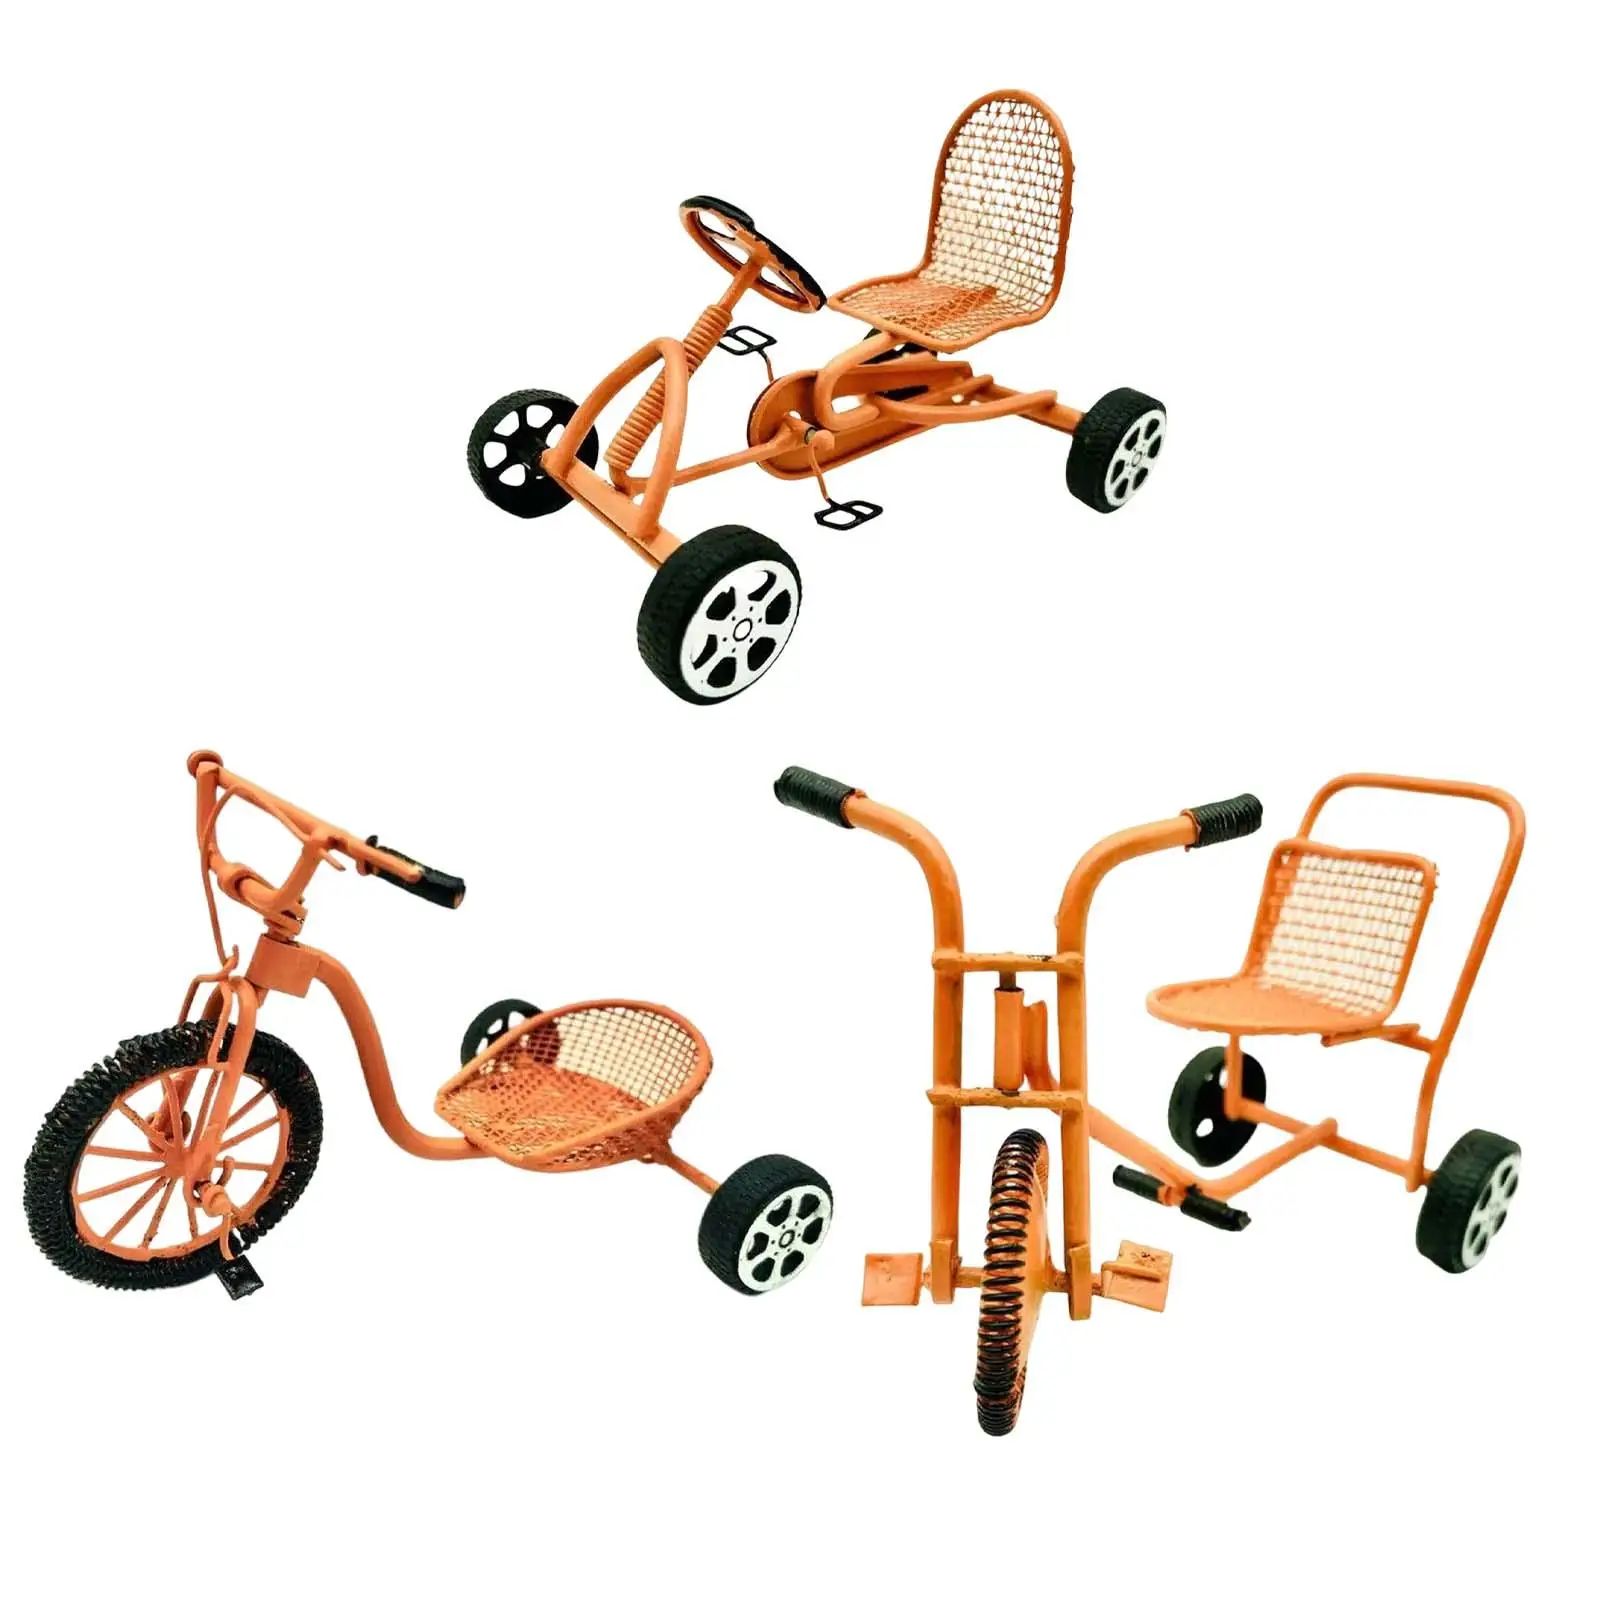 Simulation Mini Tricycle Model Trike 1:12 Dollhouse Decor Accessories Furniture Set Doll House Children Toy